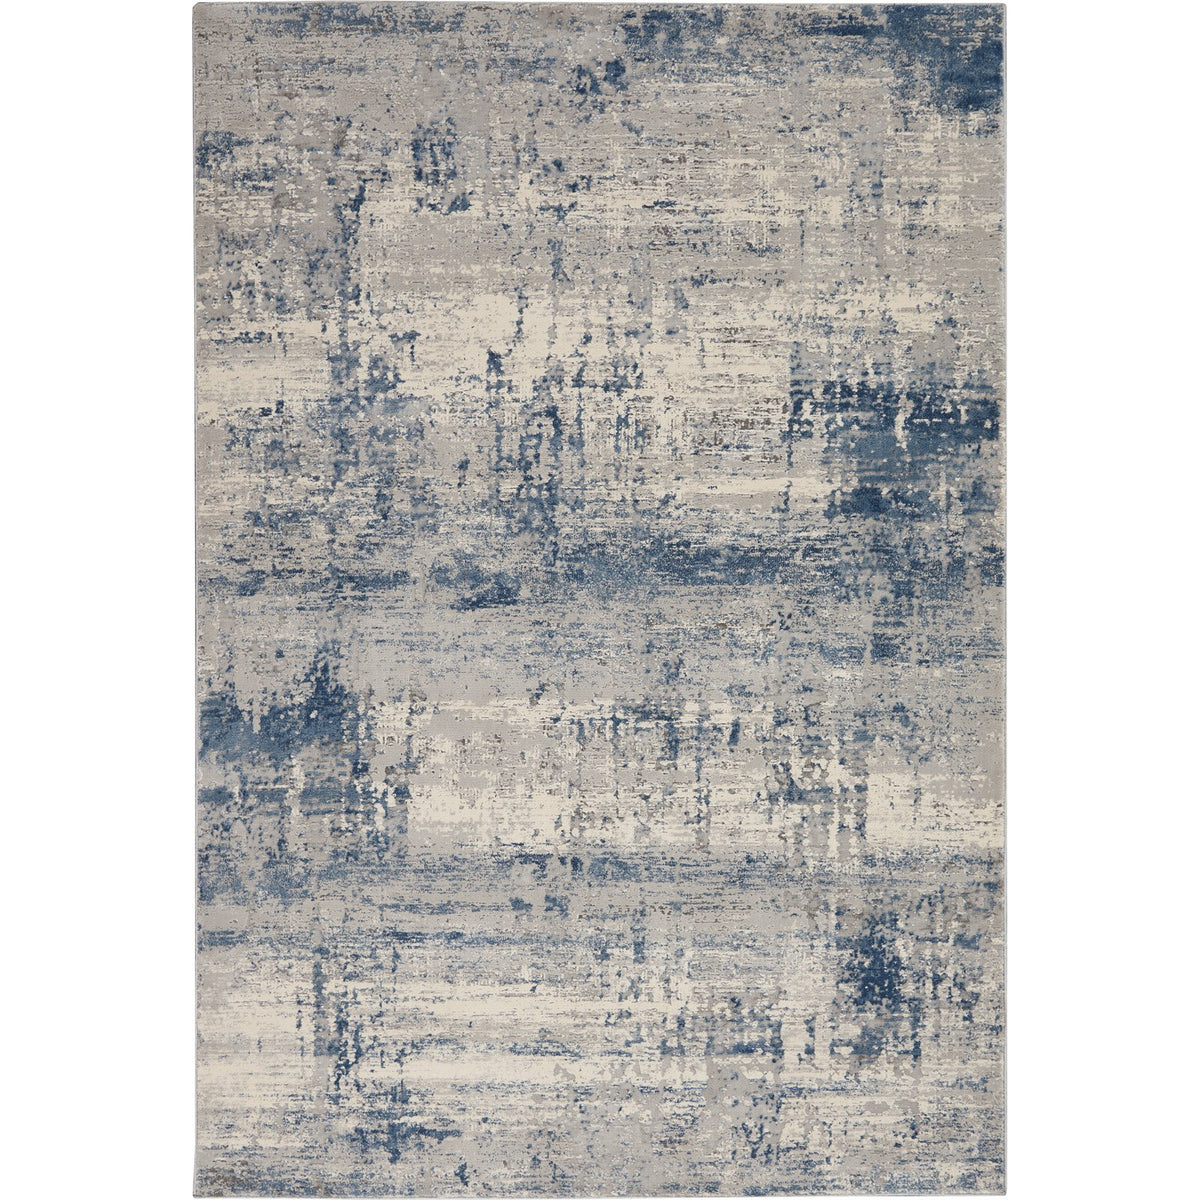 Rustic Textures Rug, Blue